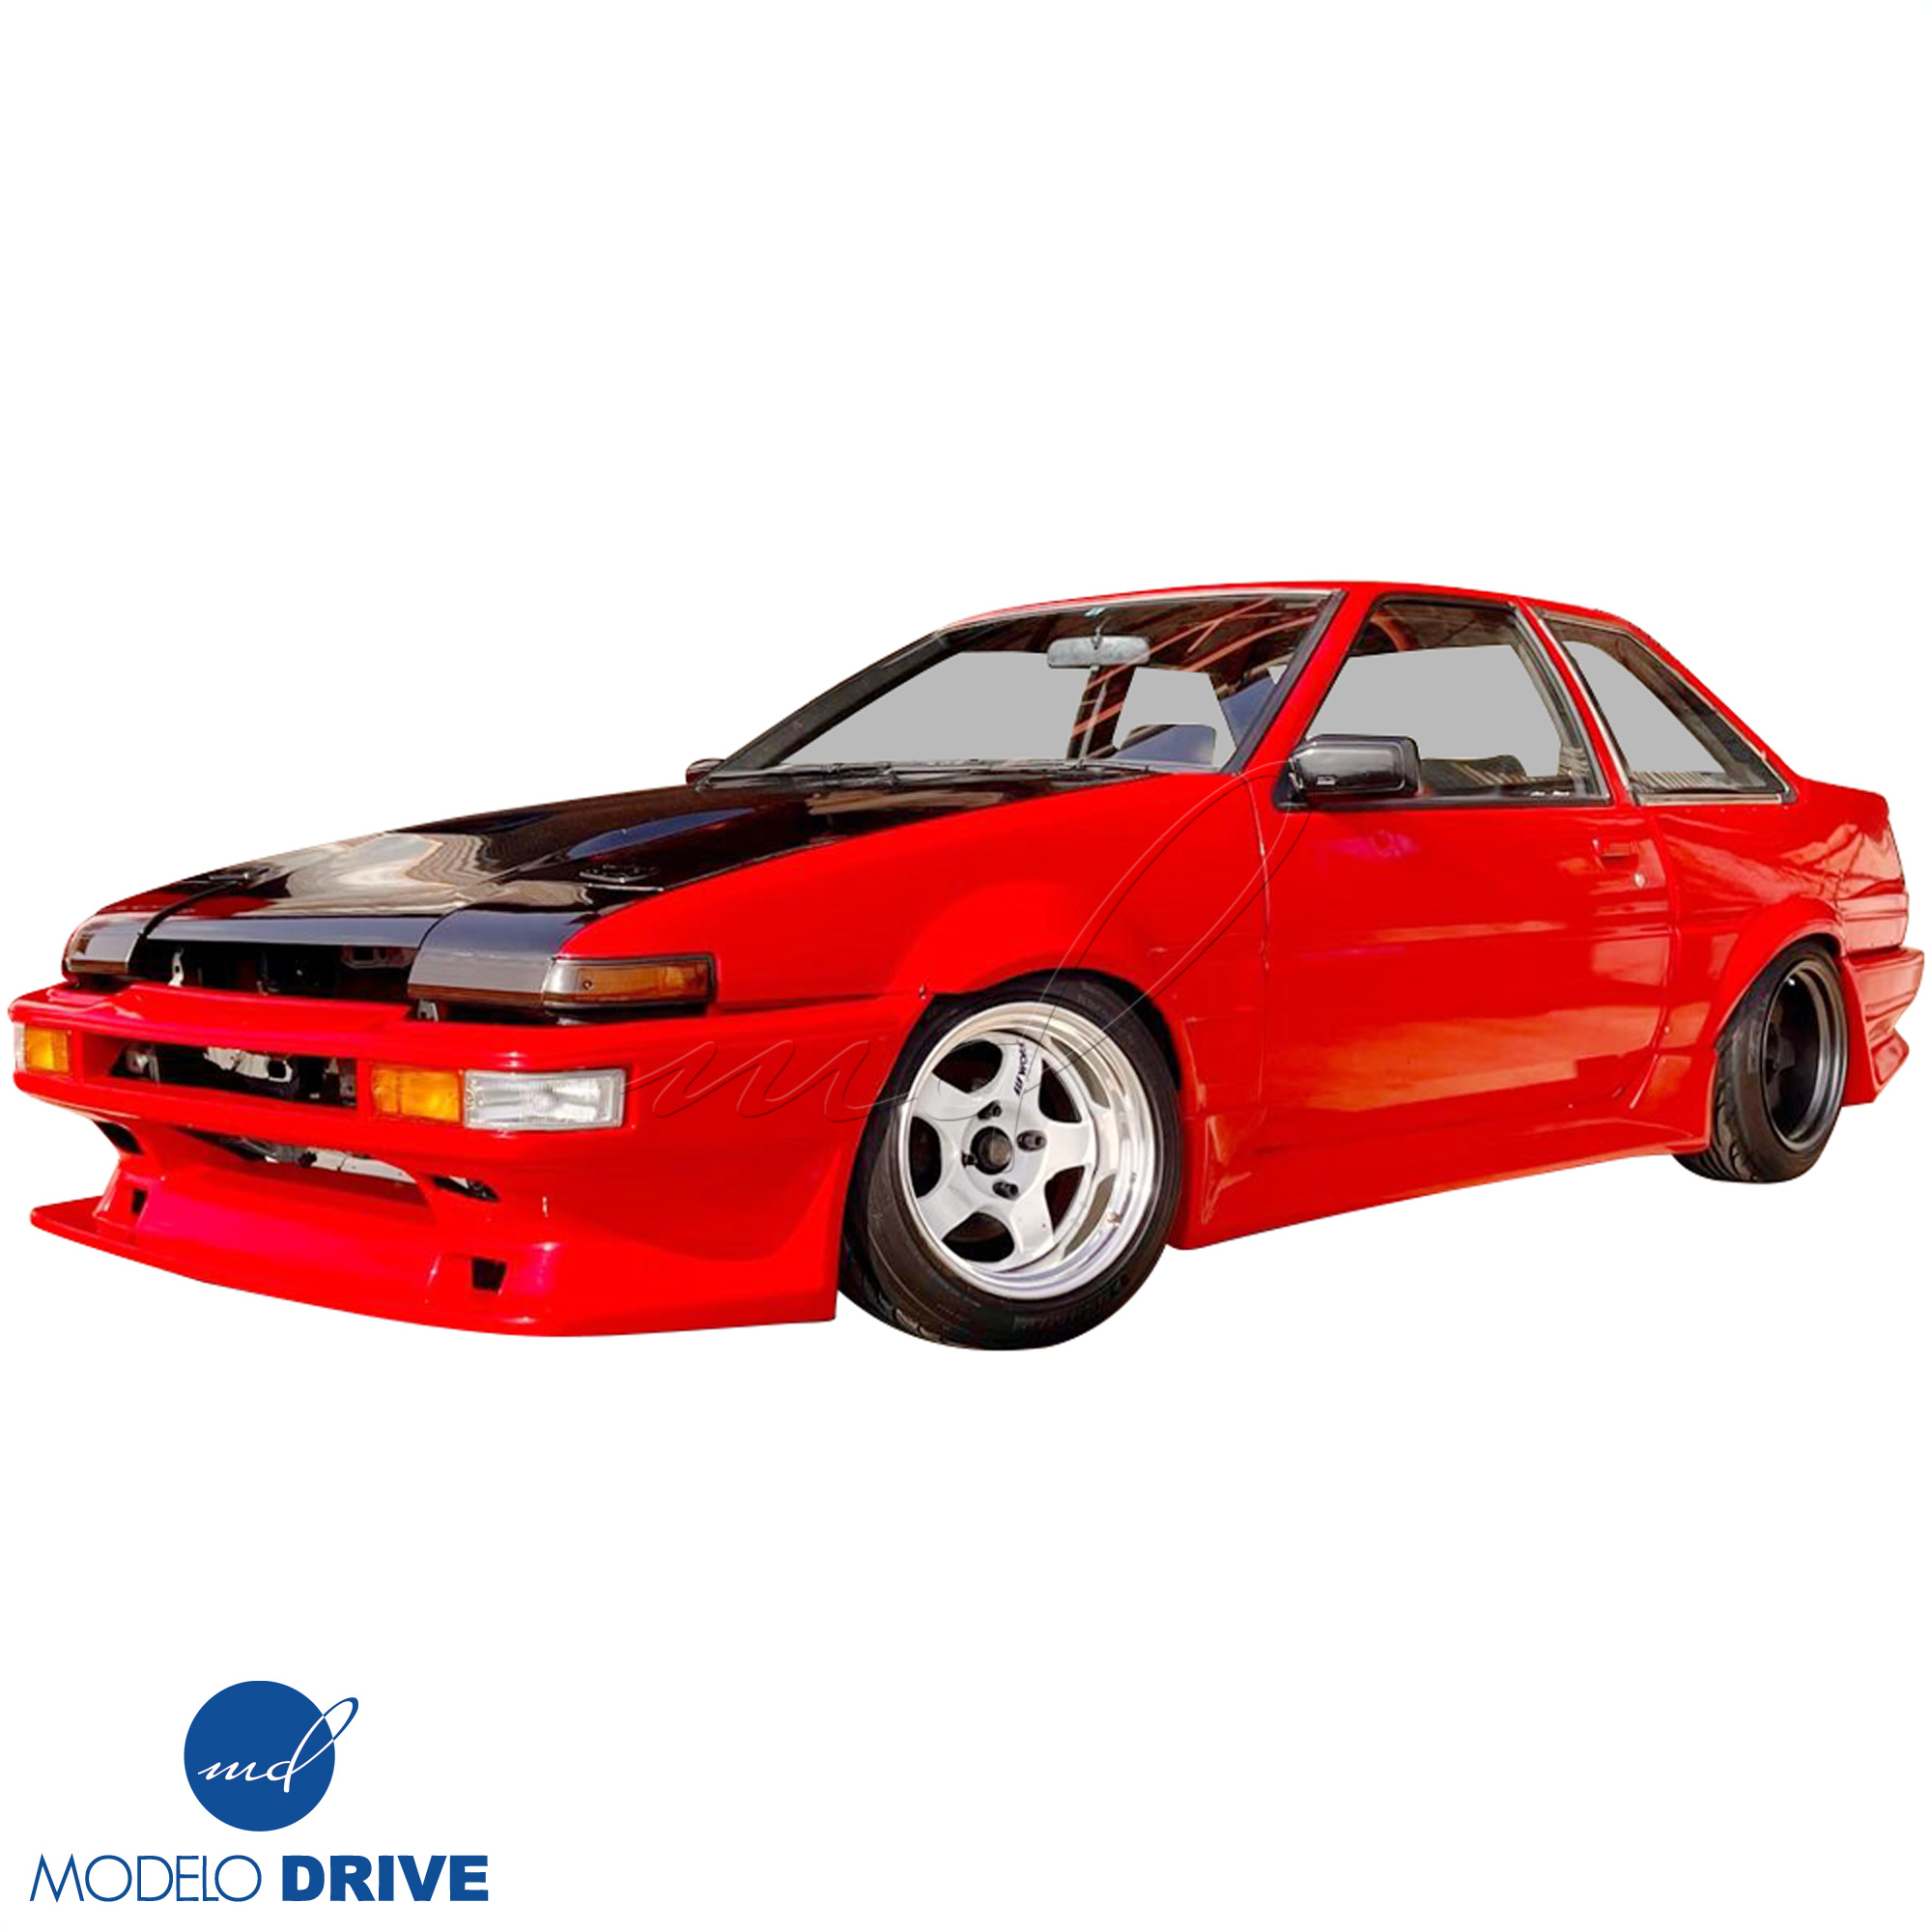 ModeloDrive FRP DMA Wide Body 40mm Fenders (rear) > Toyota Corolla AE86 1984-1987 > 2dr Coupe - Image 26